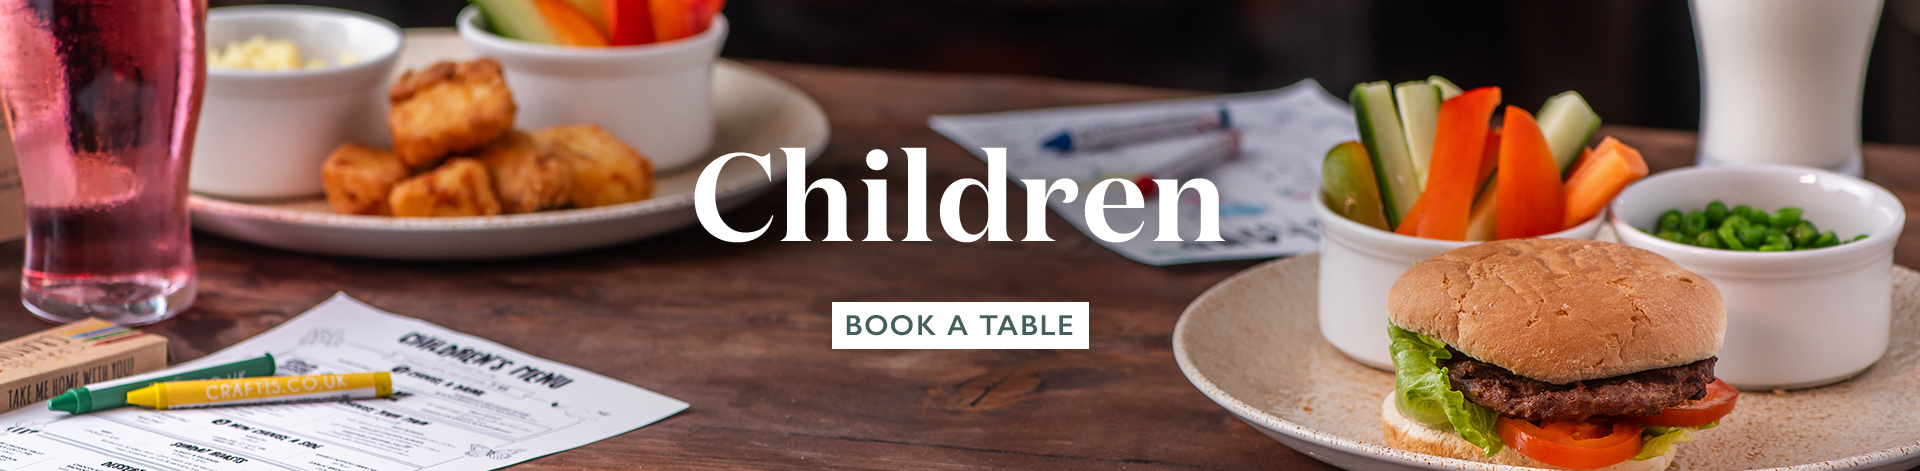 Children's Menu at The Chequers